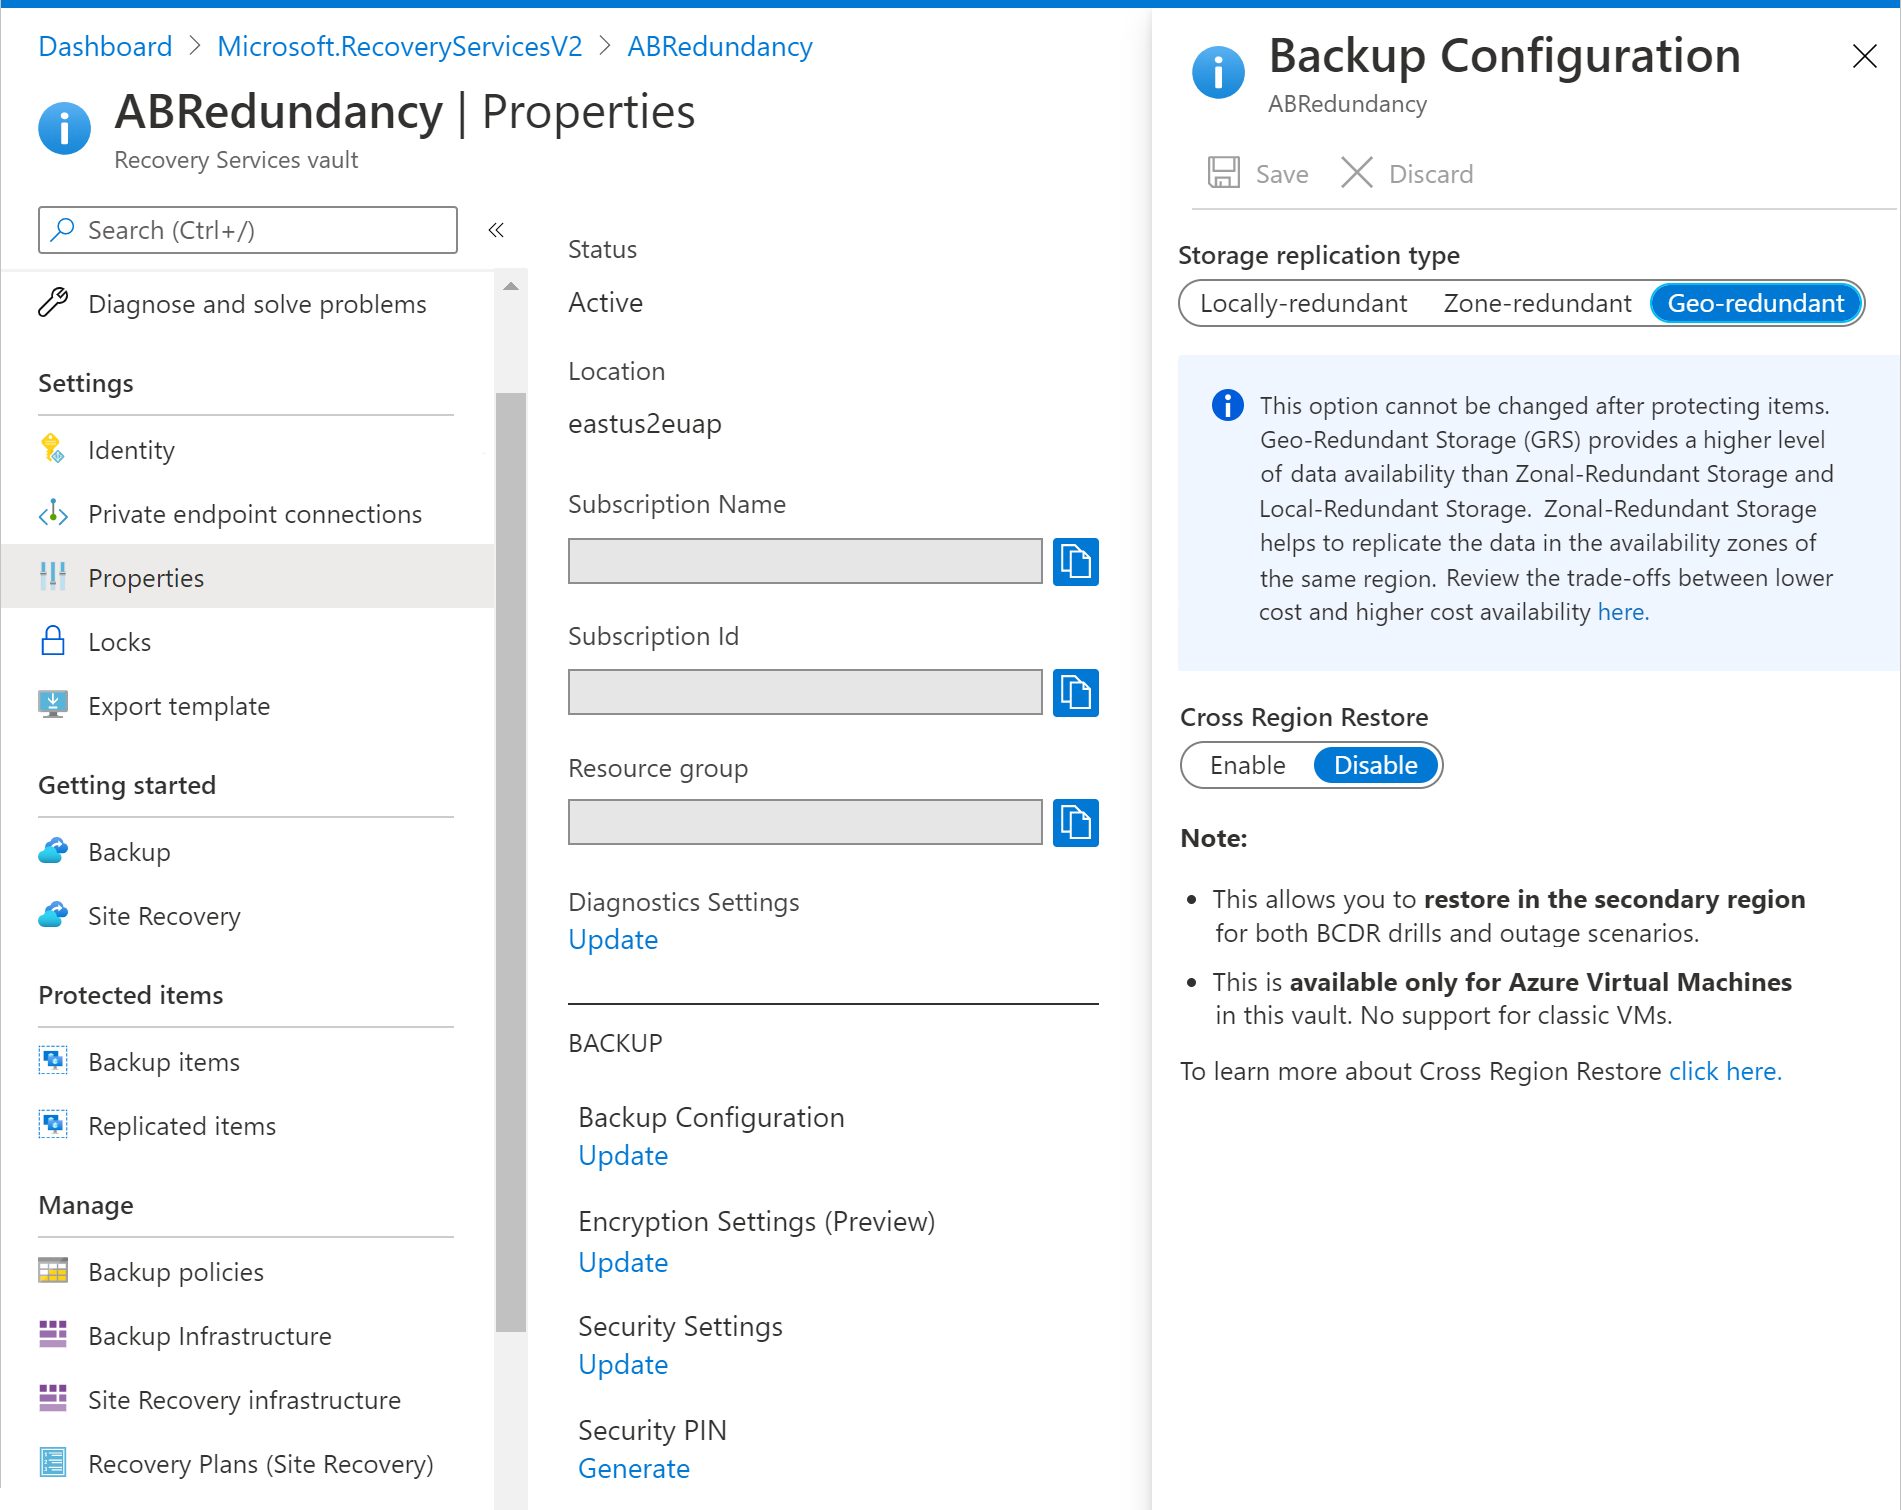 Screenshot that shows how to configure a Recovery Services vault backup page in the Azure portal.